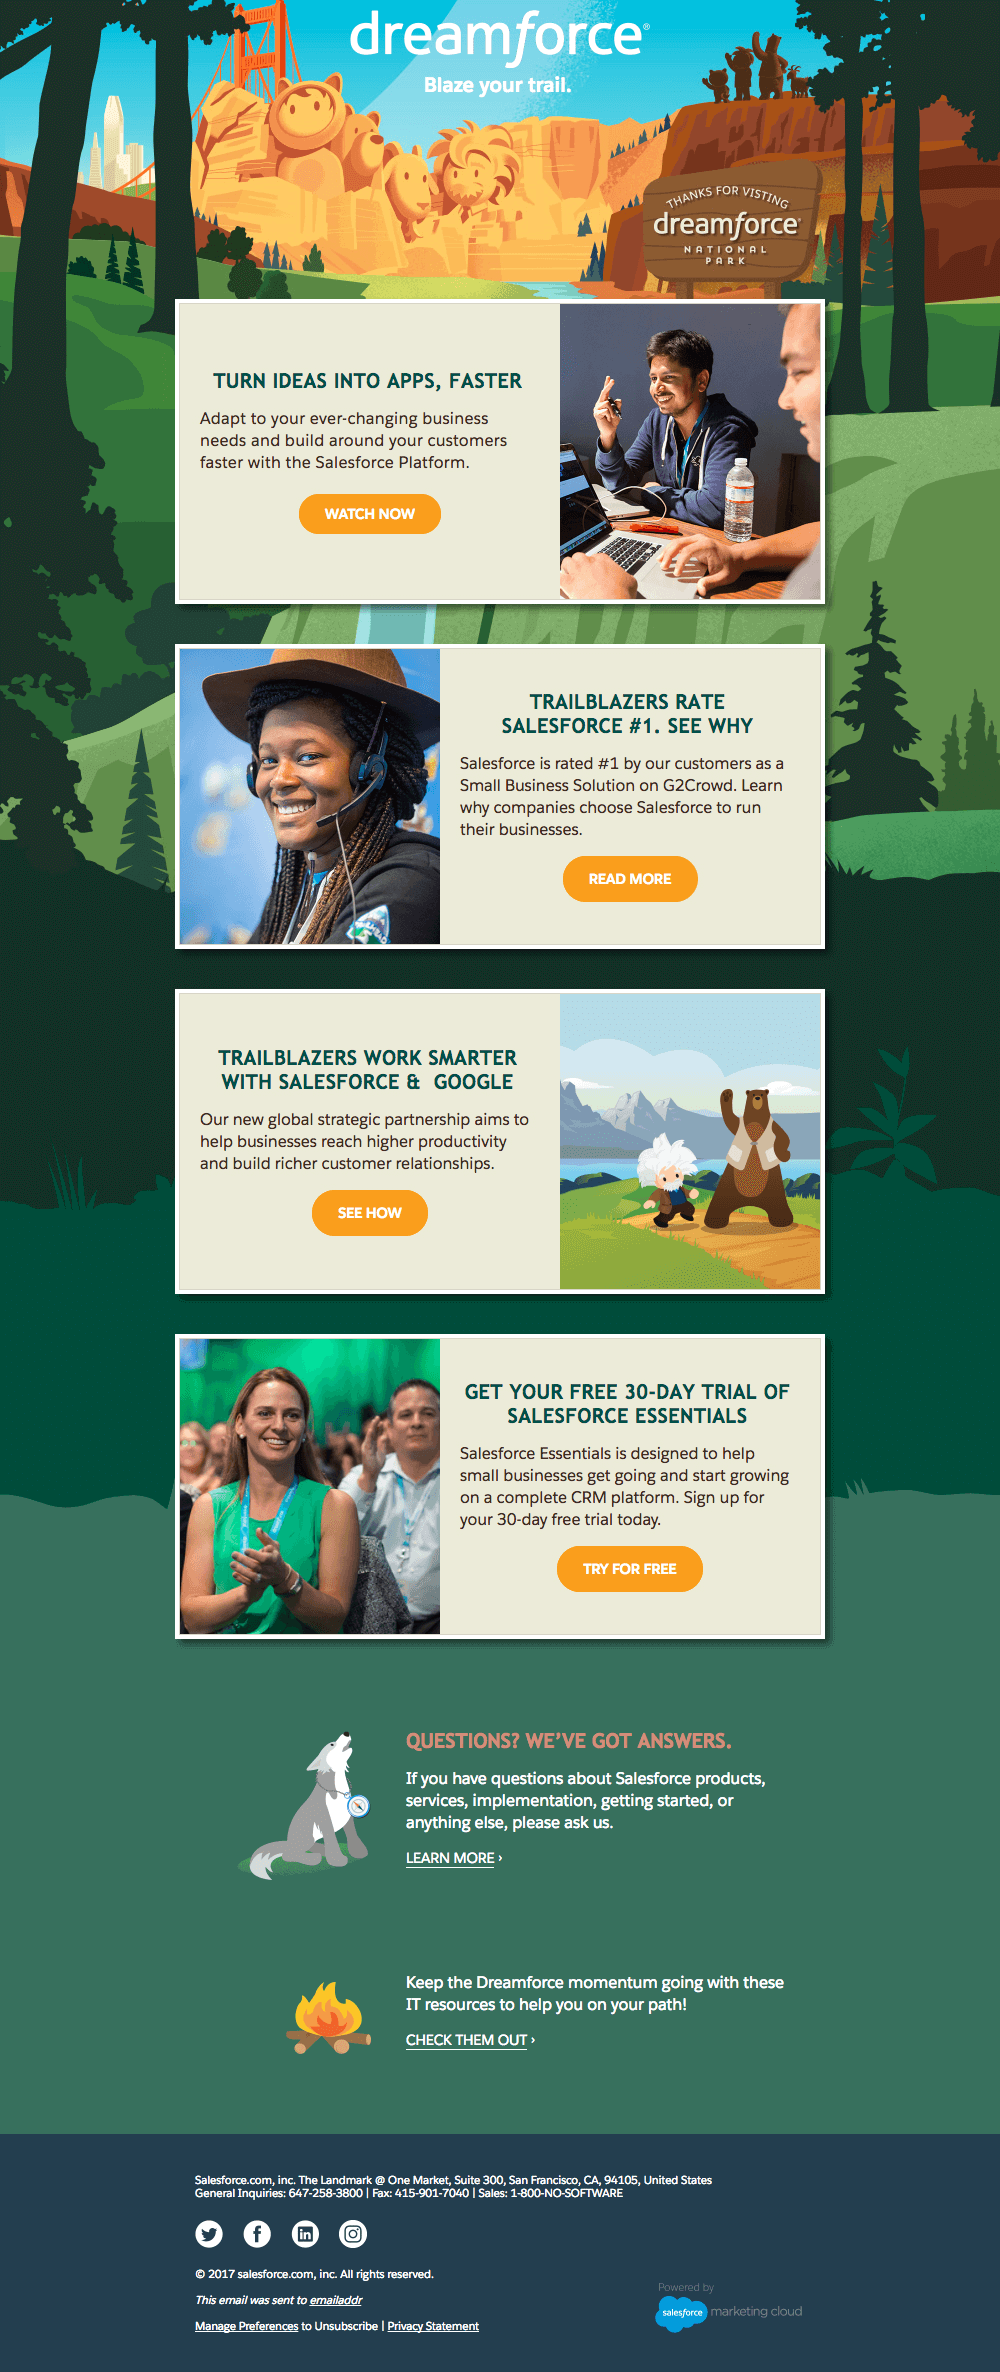 An accessible email design by Dreamforce